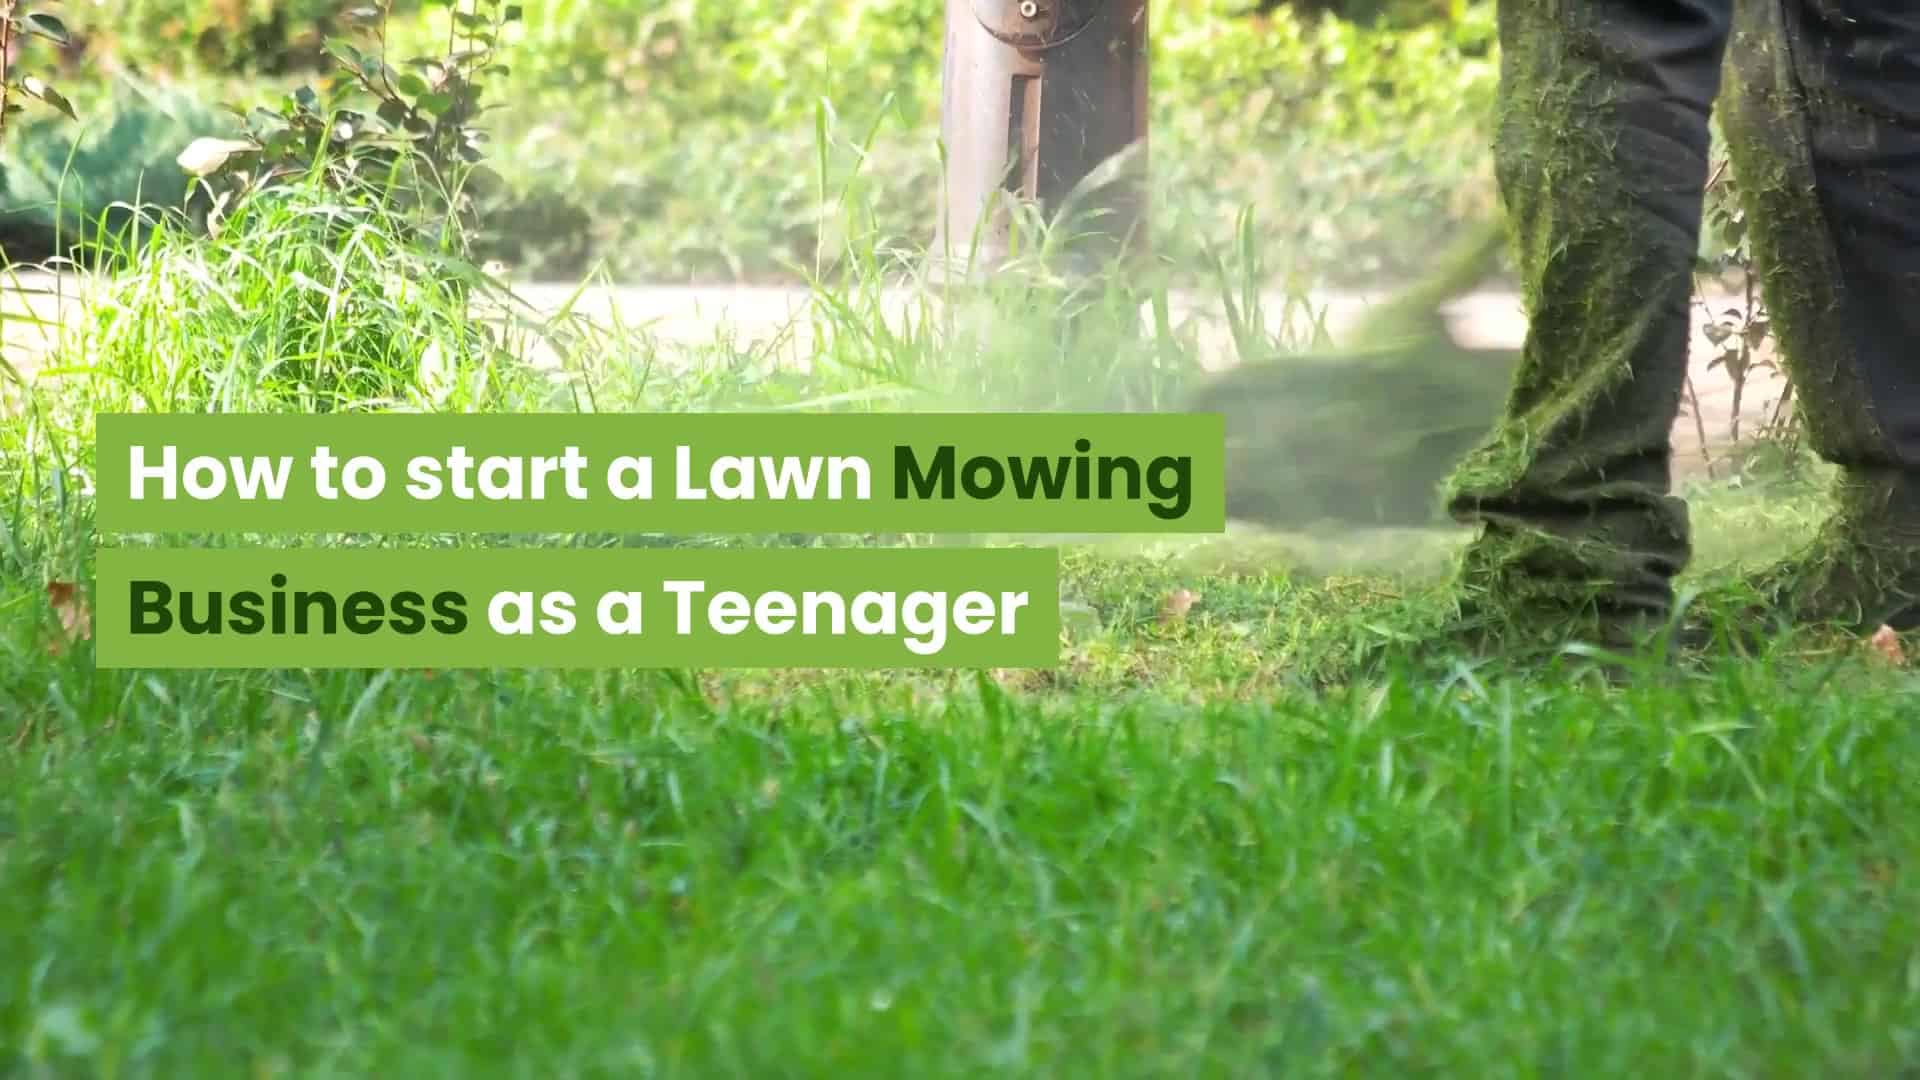 How To Start A Lawn Mowing Business As A Teenager